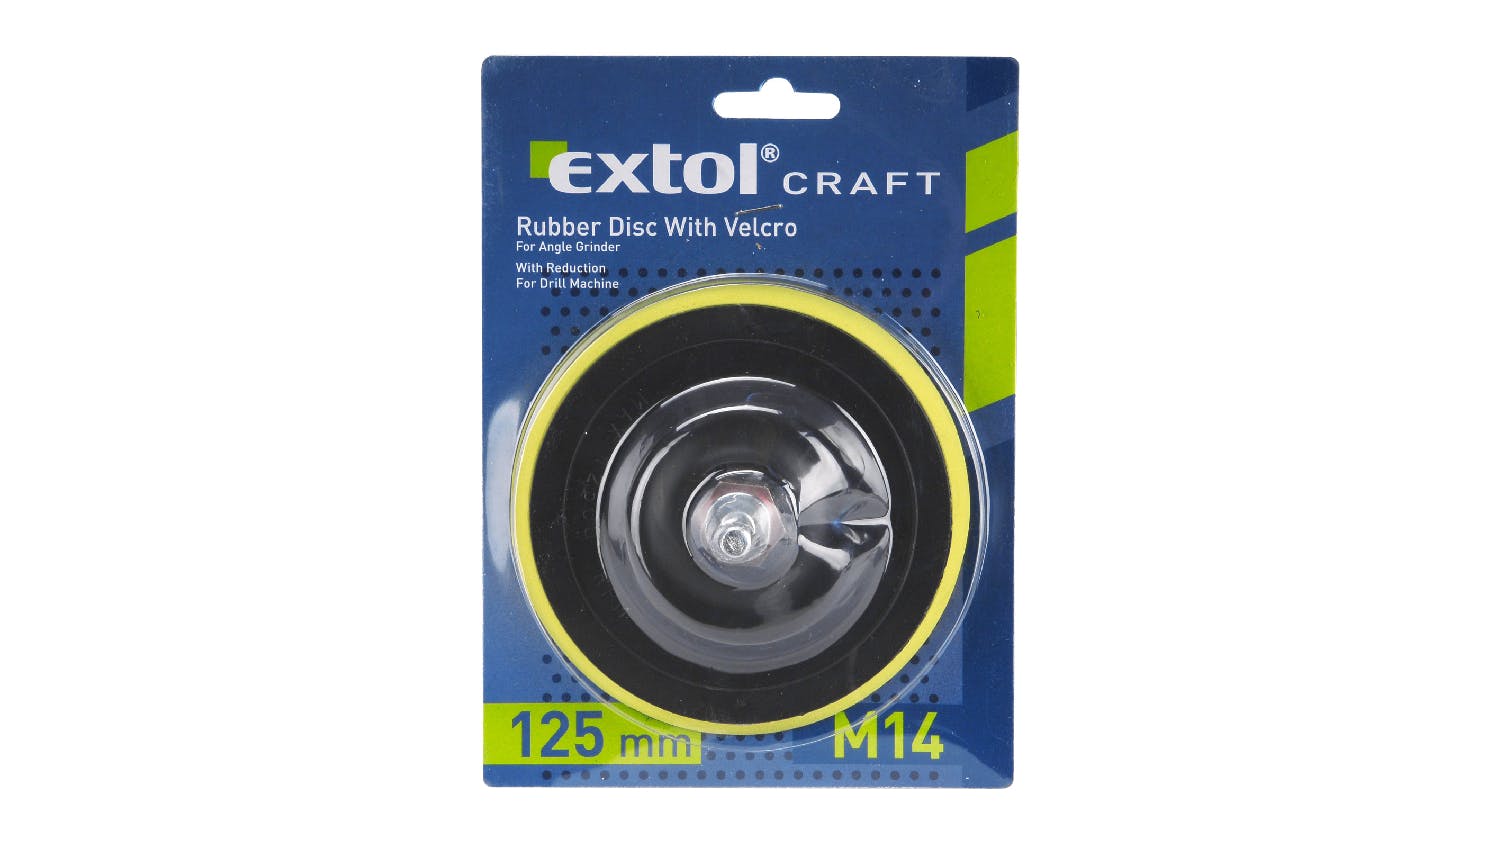 Extol Craft Rigid Carrier Disk with Velcro 125mm